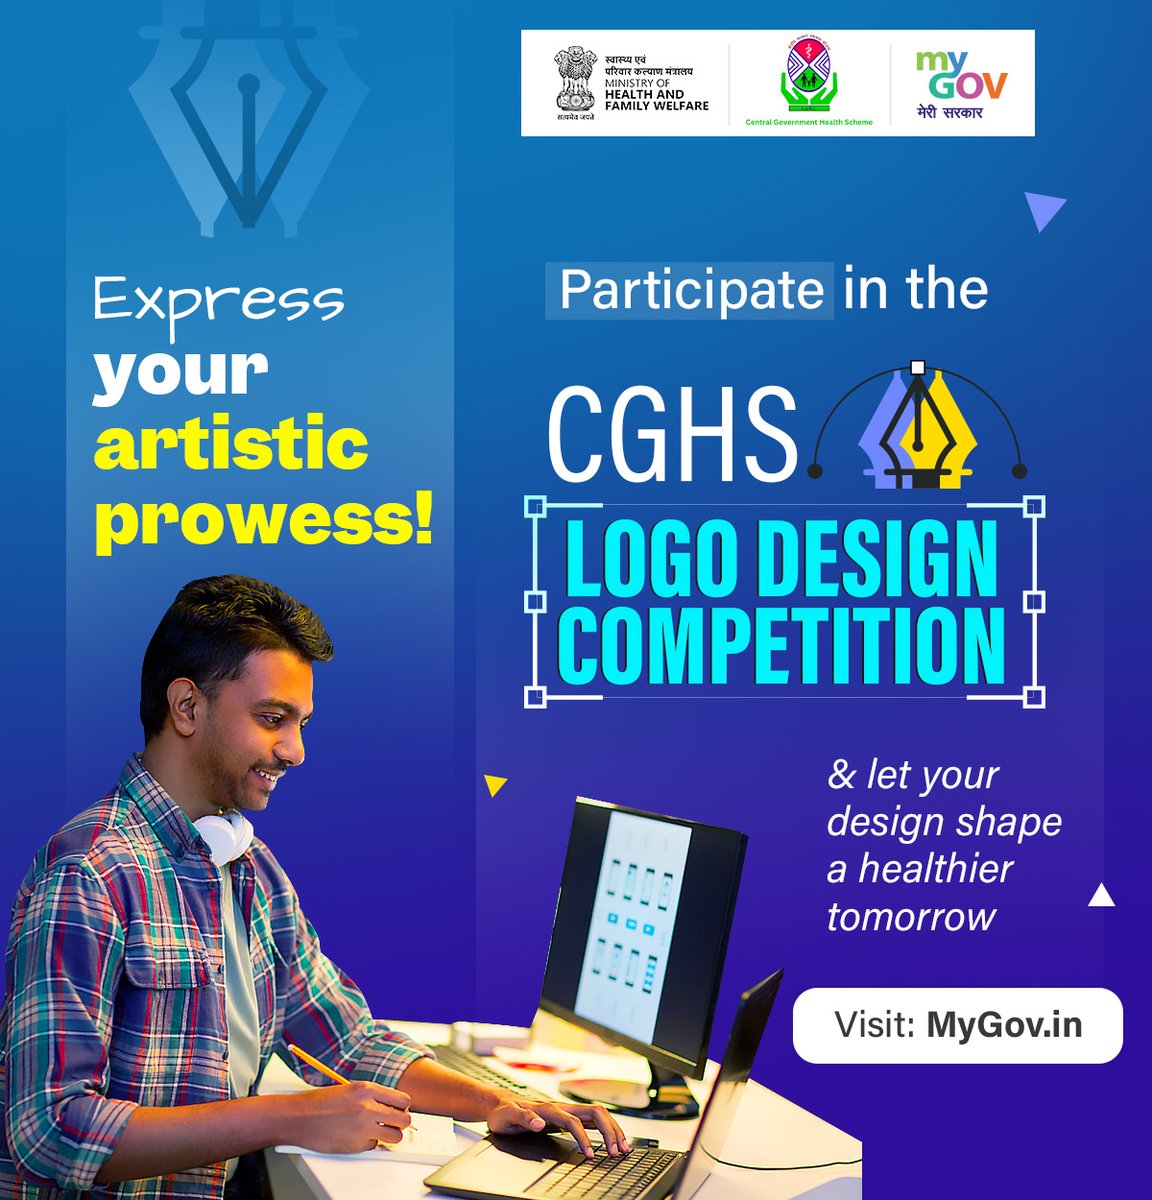 Shape the future of healthcare with your creativity!

Participate in the CGHS Logo Design Competition on #MyGov. Your creativity could shape the future of healthcare in India. 

Visit: mygov.in/task/cghs-logo…

#DesignCompetition #Healthcare

@MoHFW_INDIA